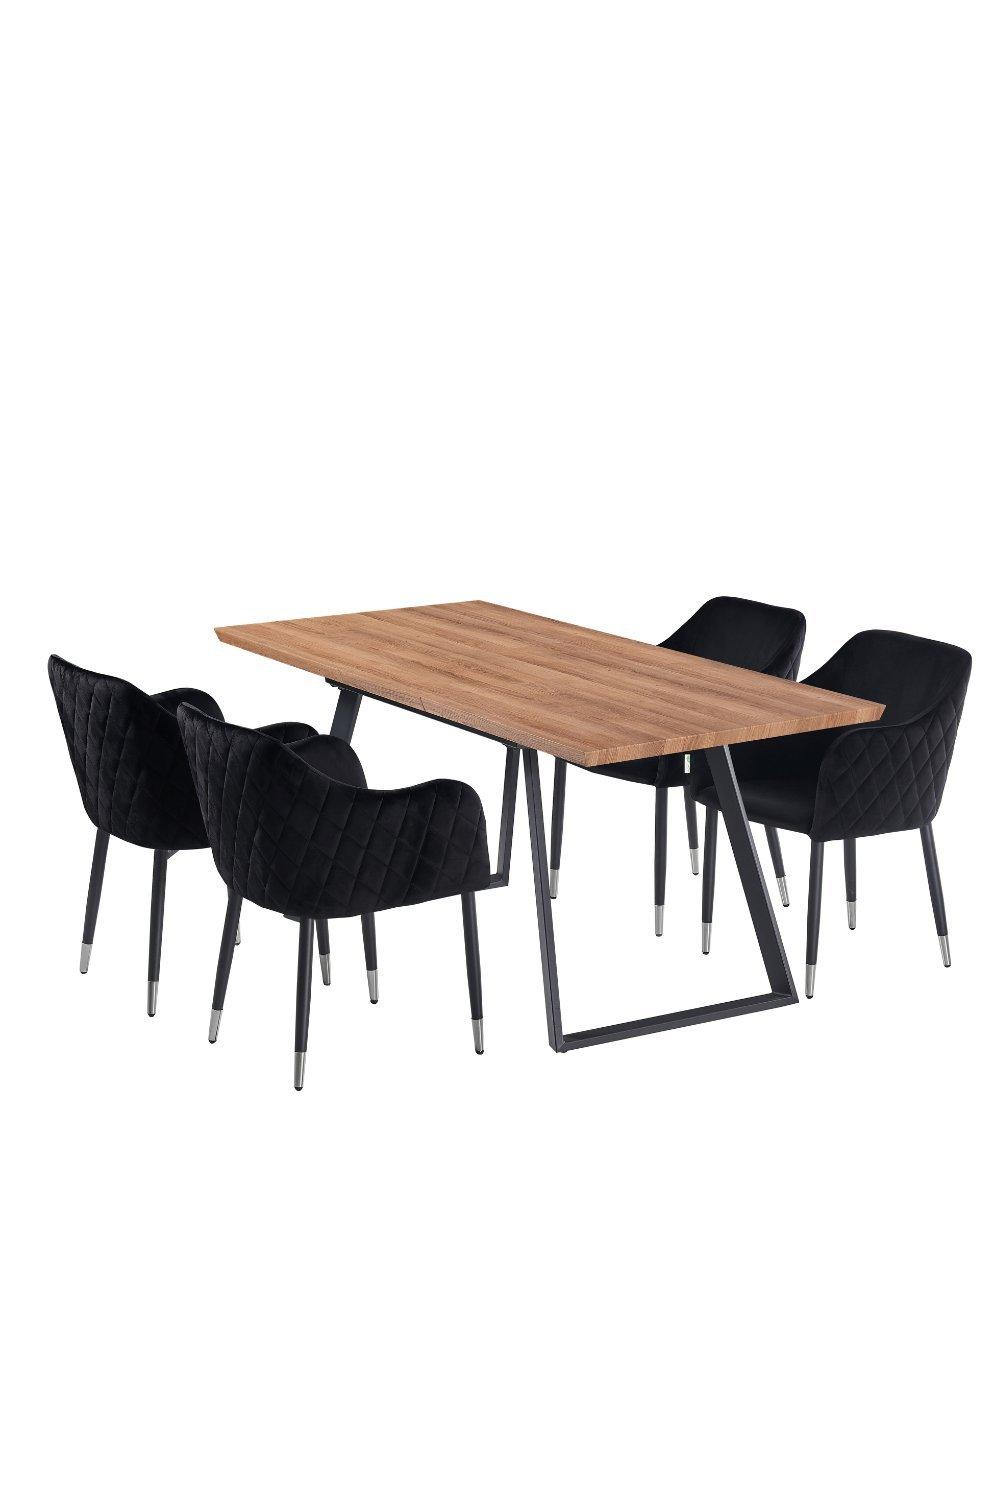 'Verona Toga' LUX Dining Set with a Table and 4 Velvet Chairs